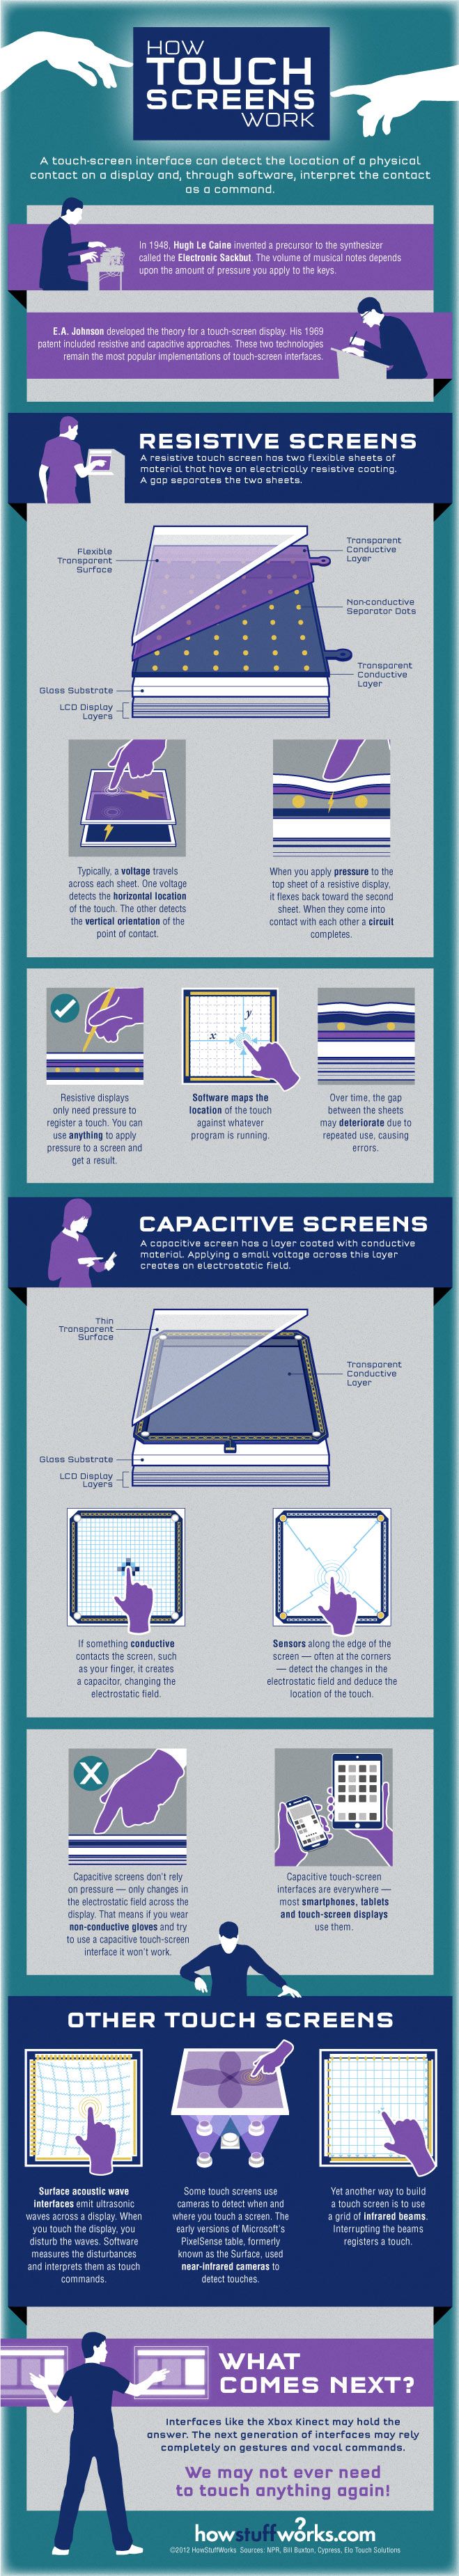 How Touch-Screens Work Infographic